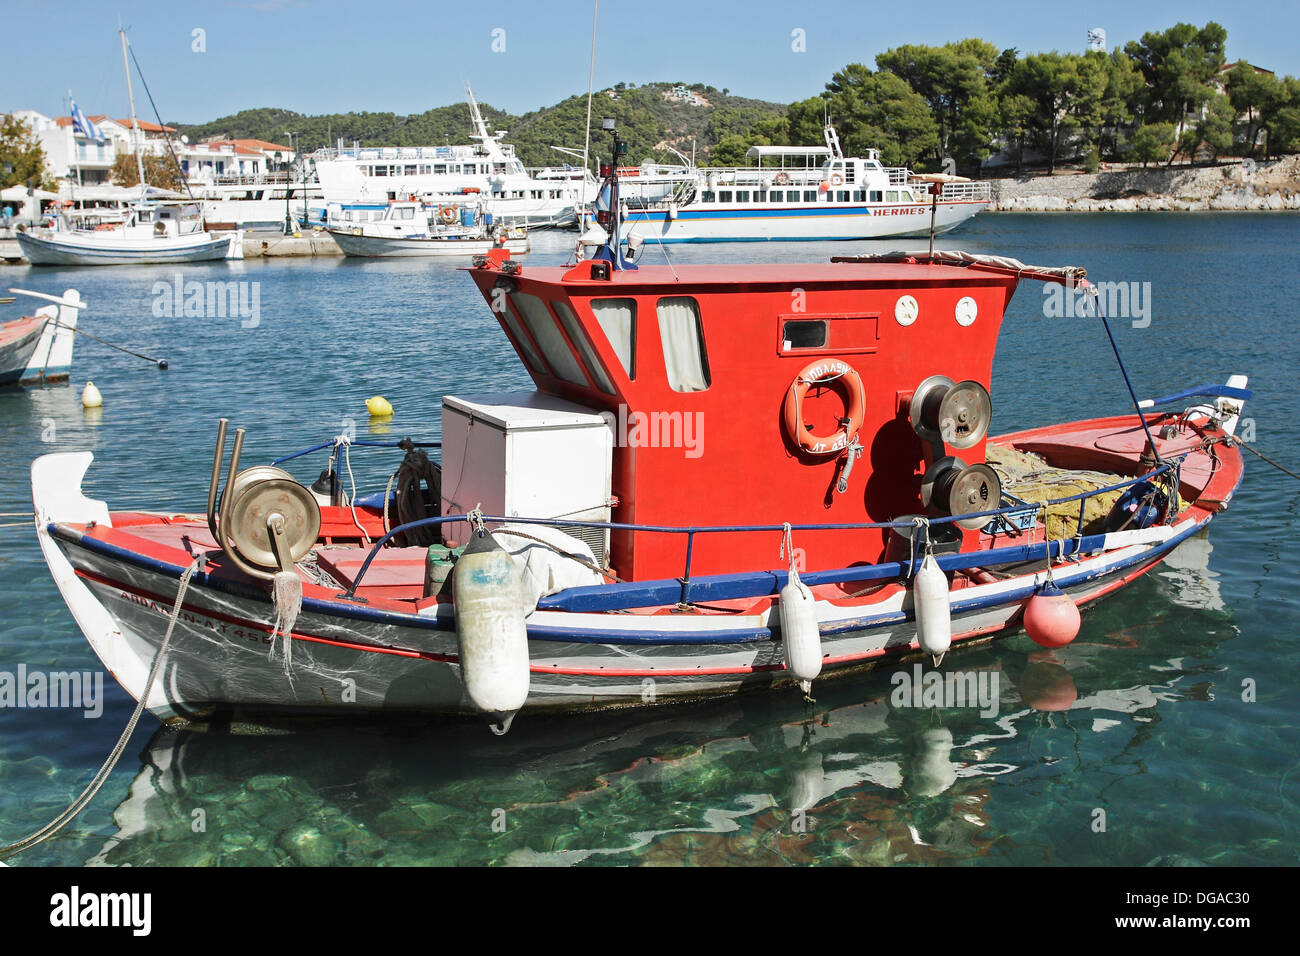 A traditional fishing boat moored in the Old Port area of Skiathos Town on the Greek Island of Skiathios in the Aegean Sea. Stock Photo